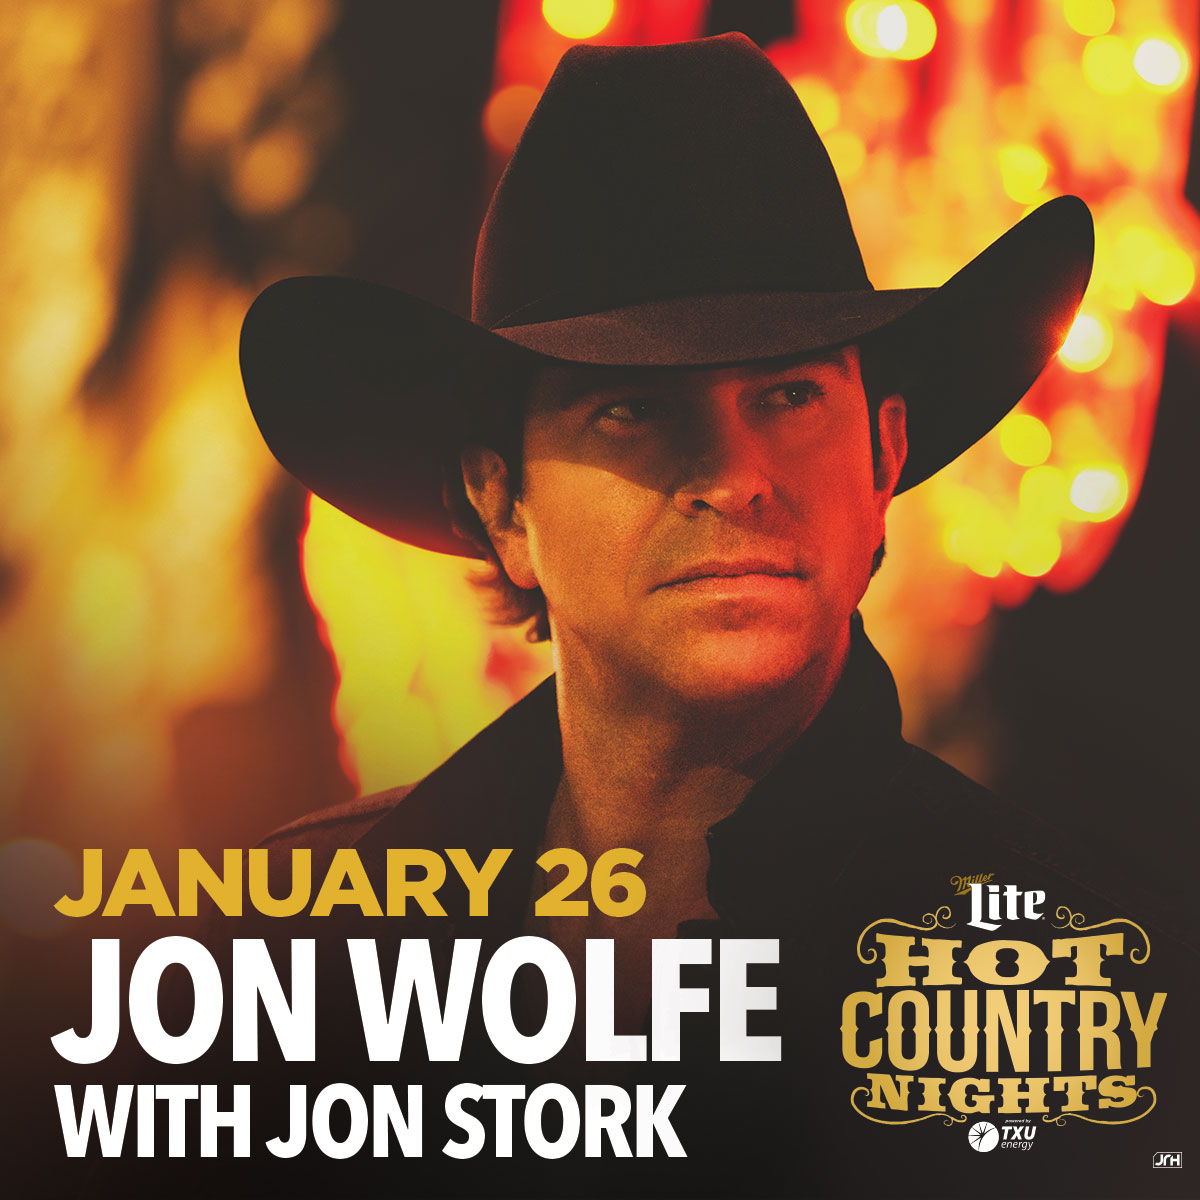 I'm so excited to announce that I'll be performing at the @tx_live Arena in Arlington, TX on January 26th for their Hot Country Night Series! My buddy @JonStork_Music will be joining me, and tickets go on sale THIS FRIDAY at 10am! 🍻